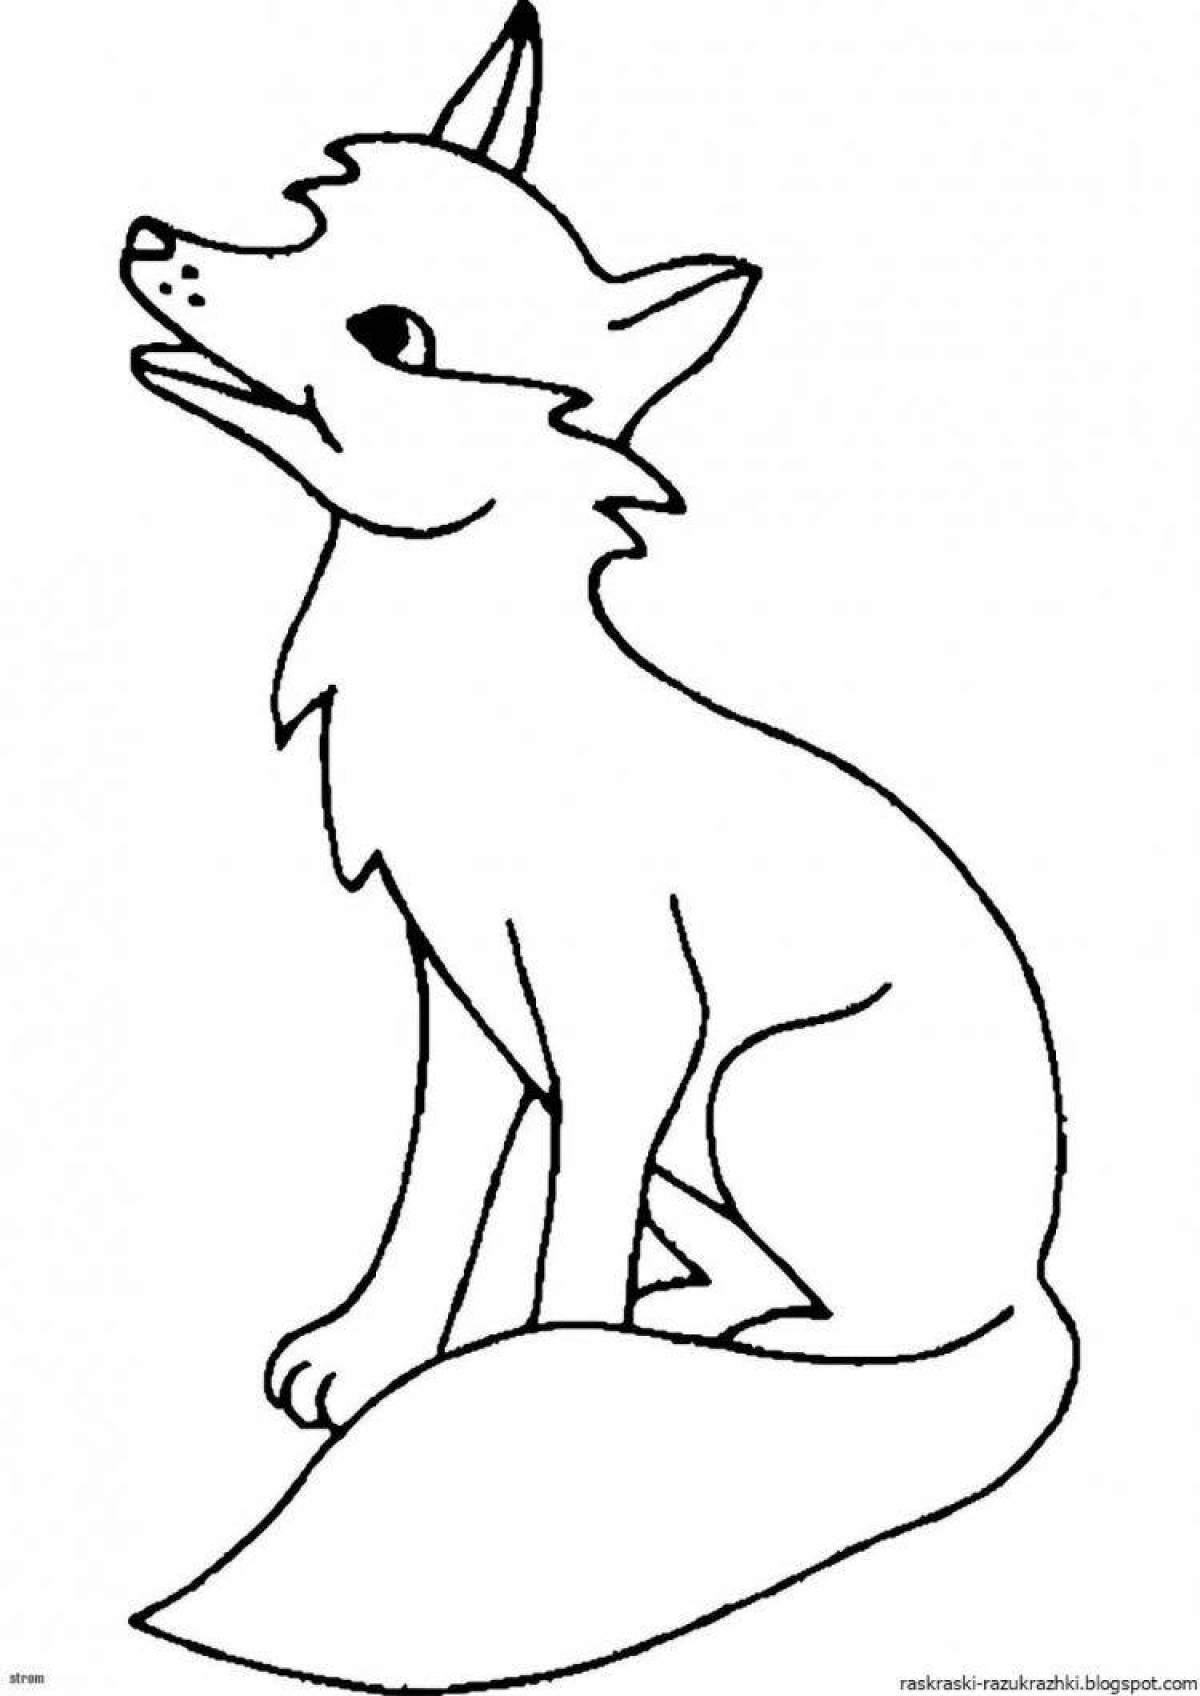 Coloring book cheerful fox for children 2-3 years old